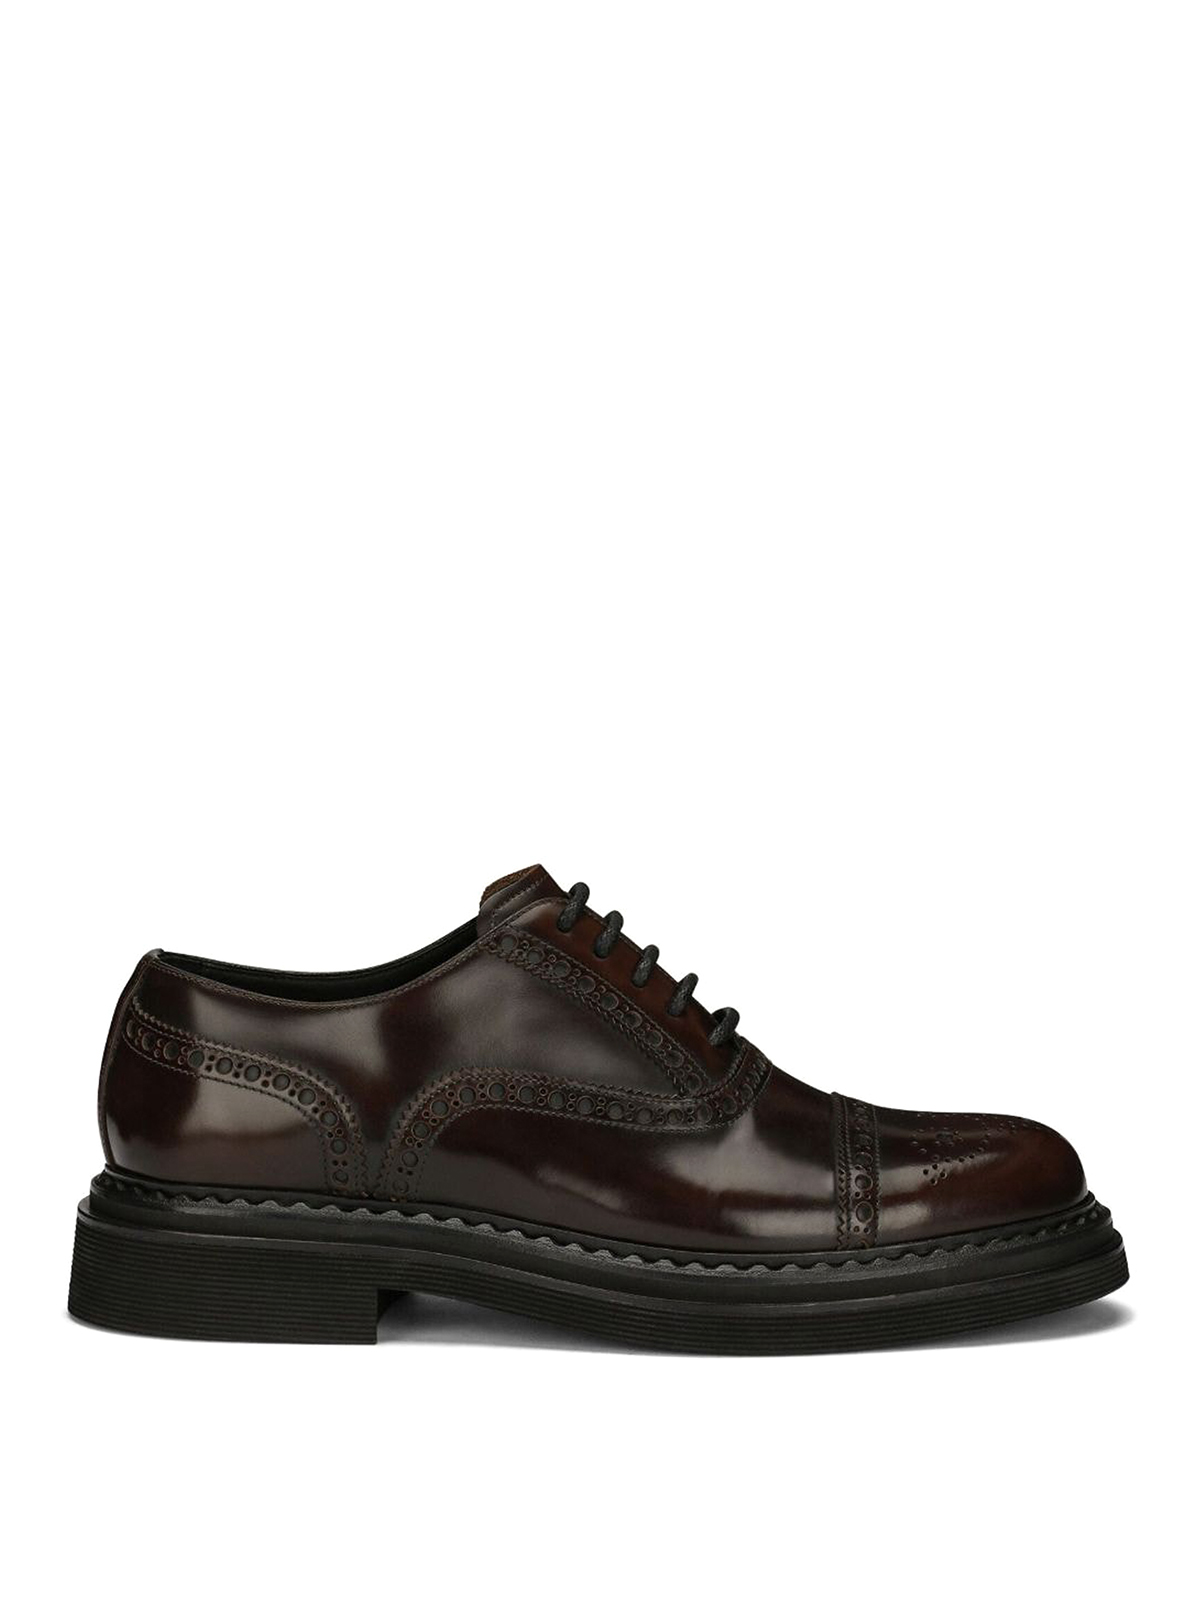 Dolce & Gabbana Lace-up Leather Brogues In Brown